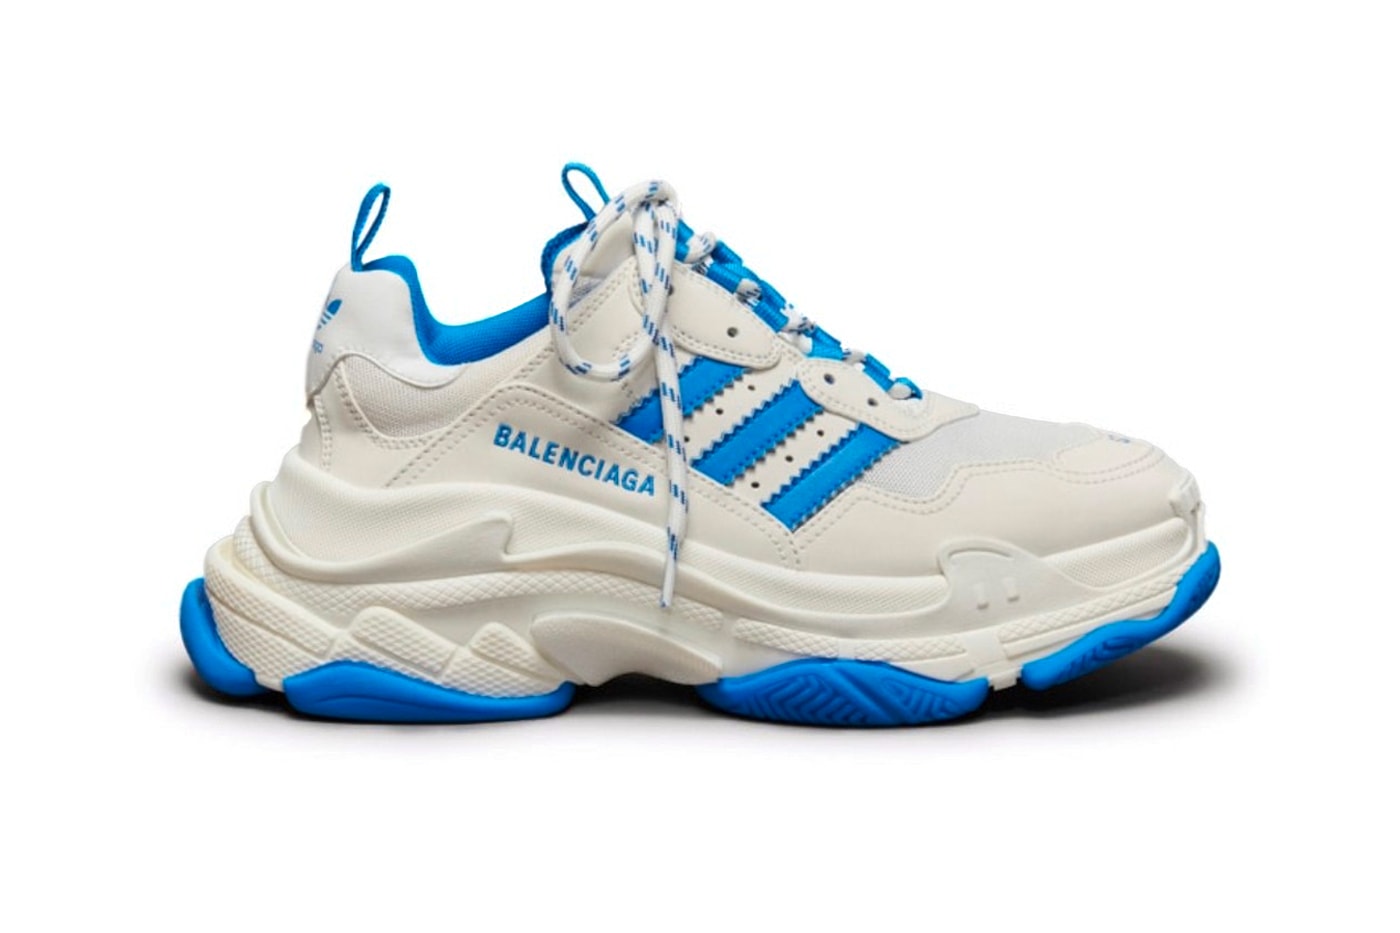 Balenciaga adidas Footwear Collection Release Date info store list buying guide photos price